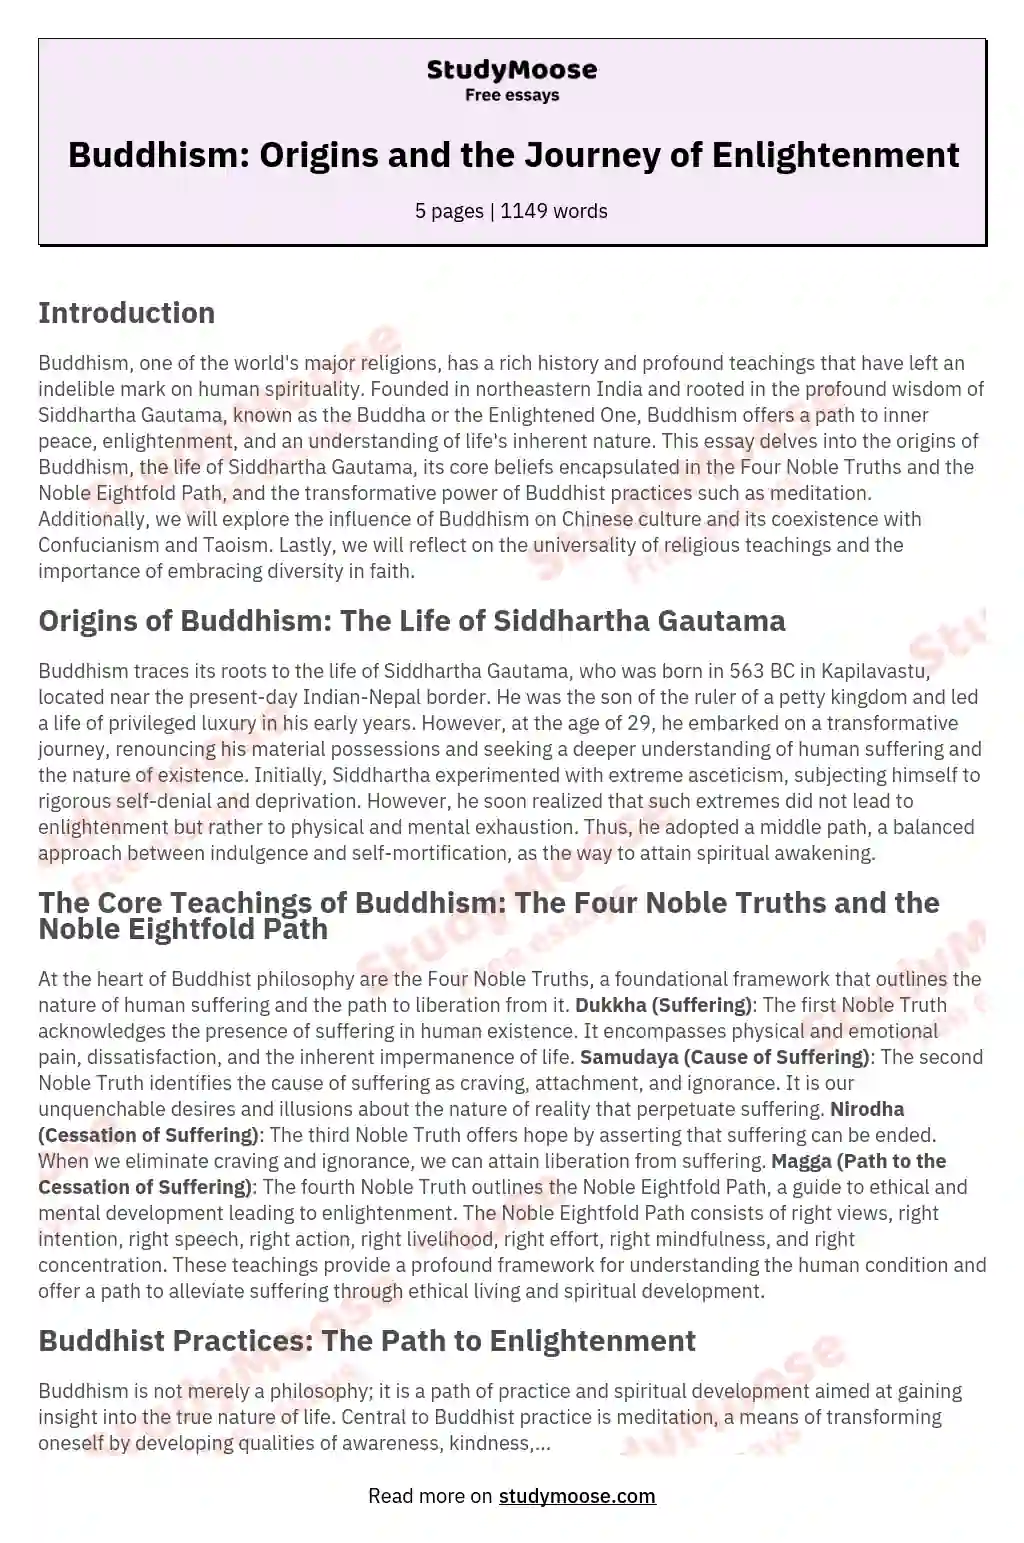 Buddhism: Origins and the Journey of Enlightenment